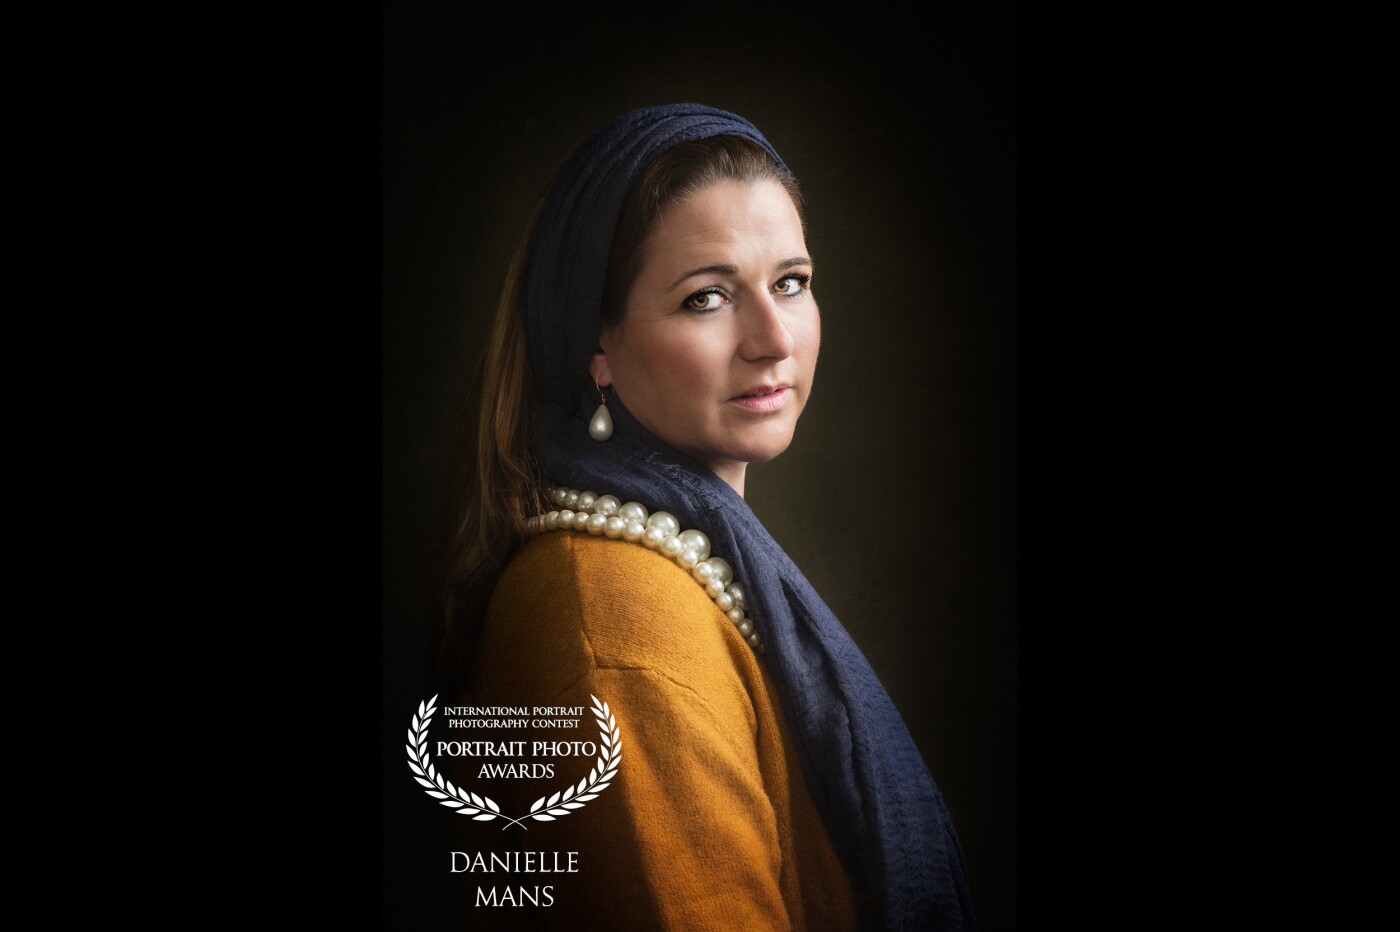 The Girl with the Pearl earring with a personal touch. Loved working together with this sweet colleague photographer to create her perfect and personal portrait as the girl with the pearl earring.